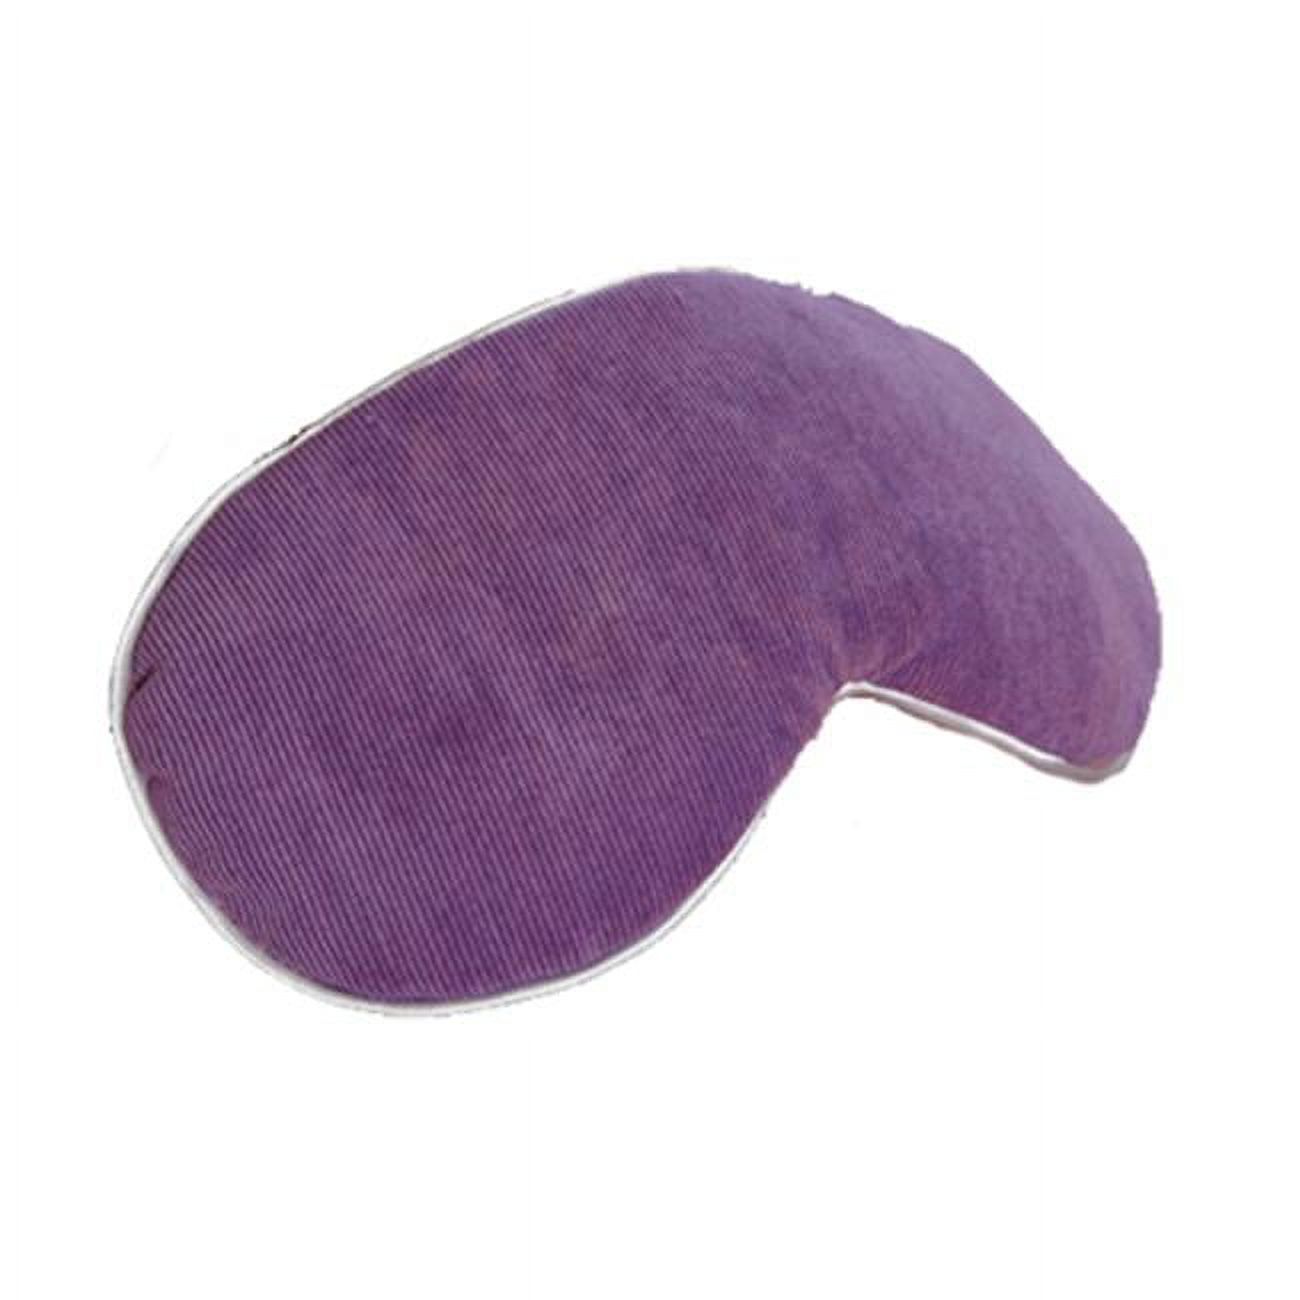 Bed Buddy Relaxation Mask with Moist Heat for Muscle Pain Relief, Lavender Aromatherapy, Purple - image 1 of 2